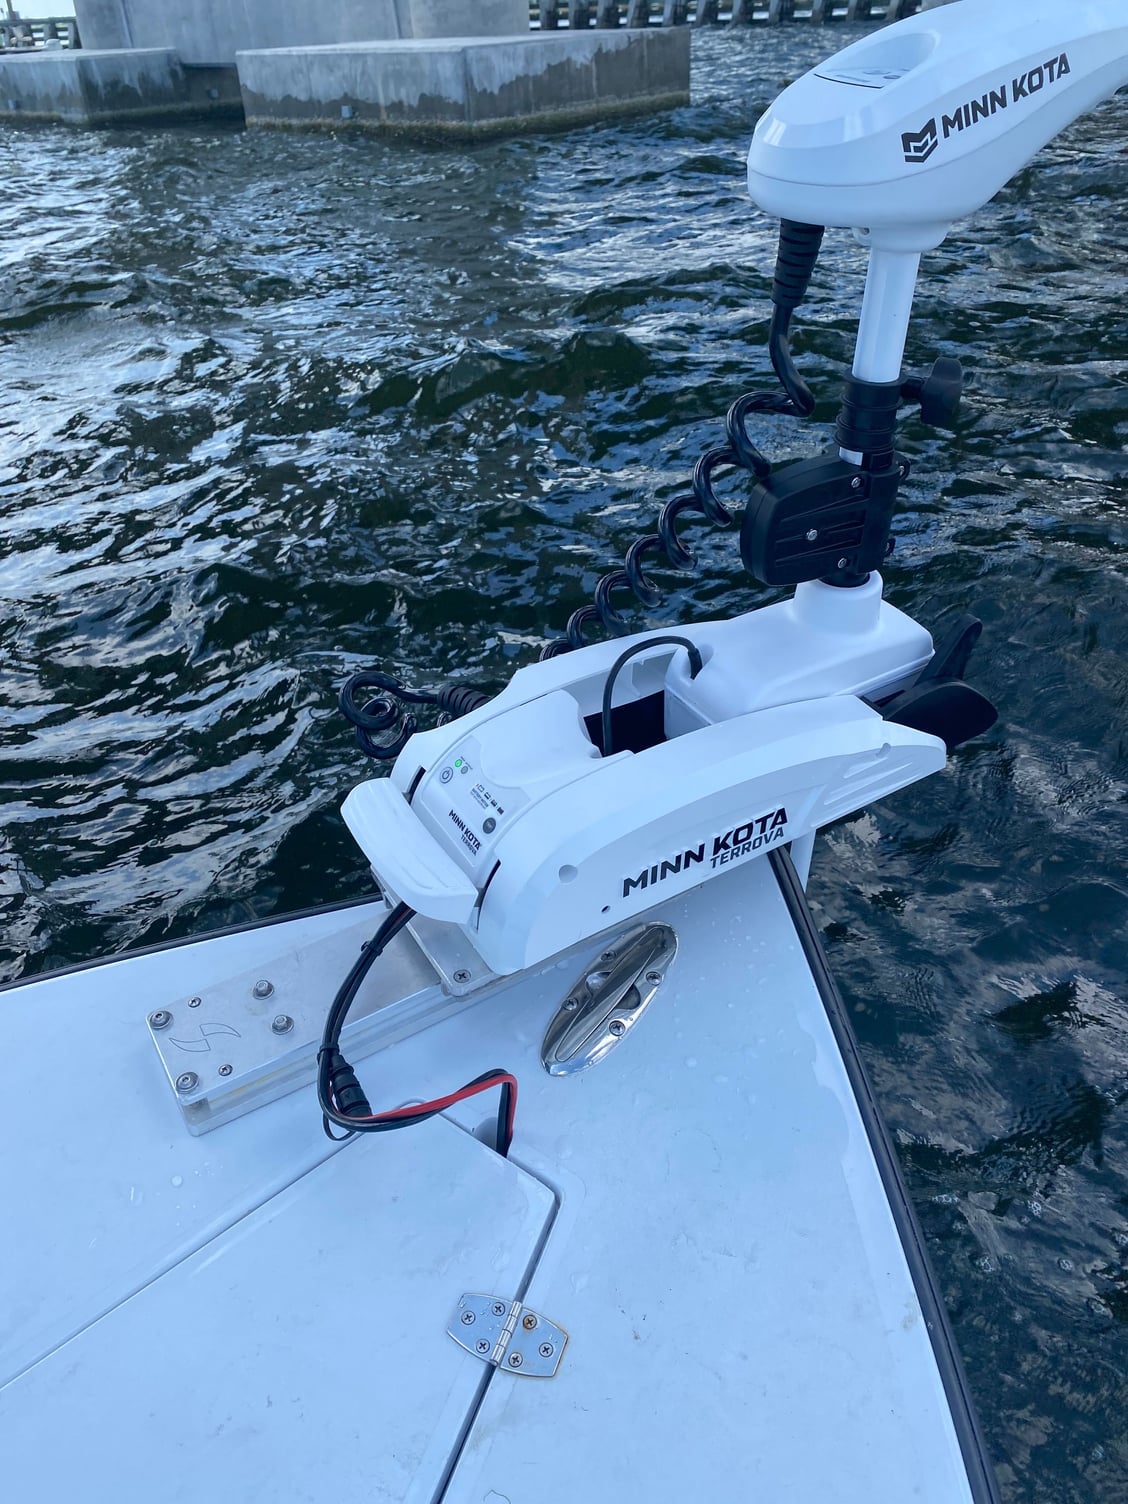 TROLLING MOTOR ISSUES? Mounting challenges? Annoying overhang